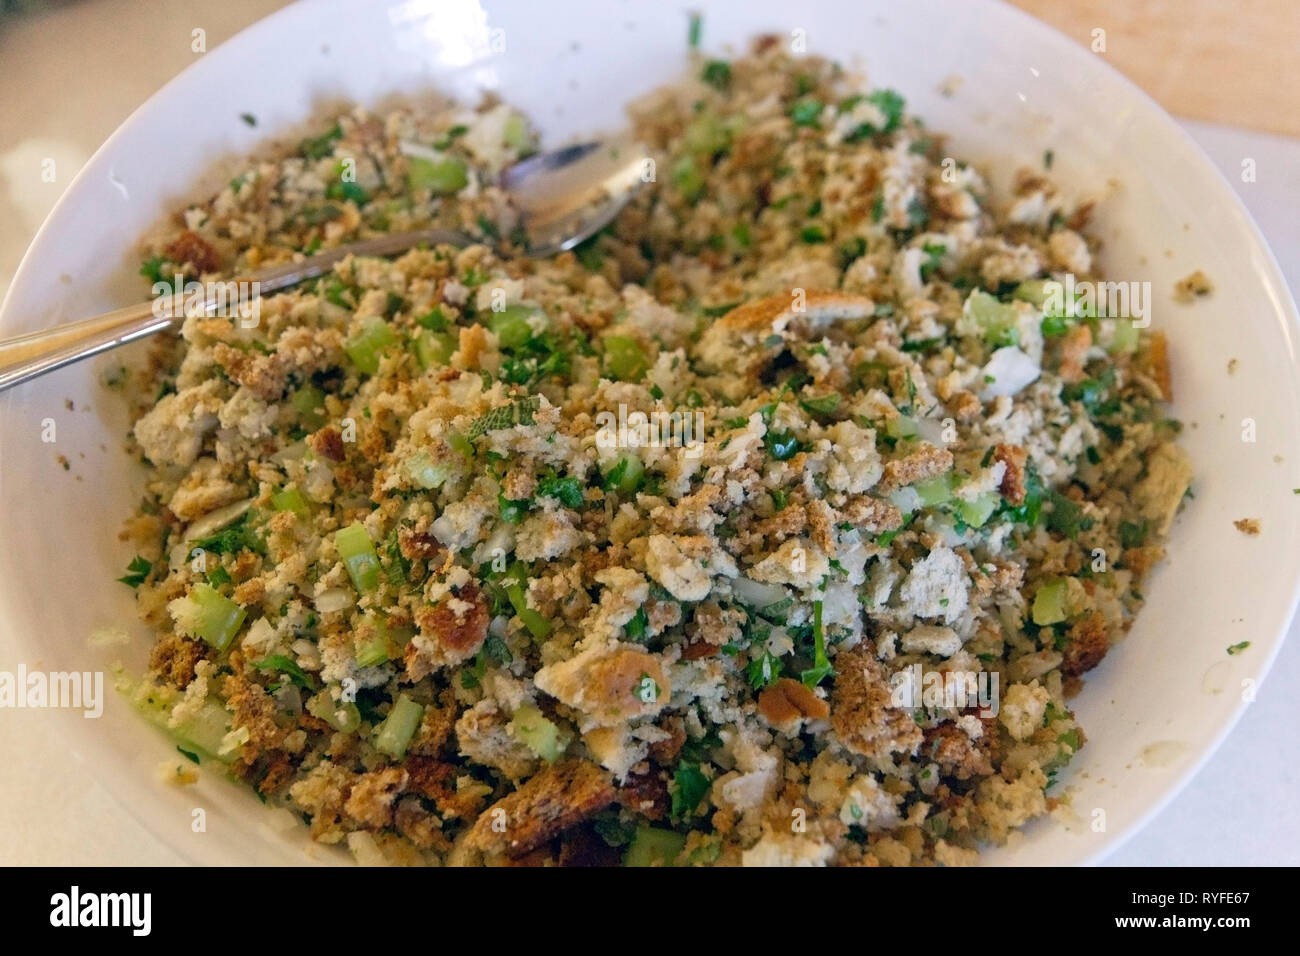 Close Up Of Raw Stuffing Mixture For Thanksgiving Turkey A Recipe Of Bread Crumbs Celery Onion Parsley Sage And Butter Stock Photo Alamy